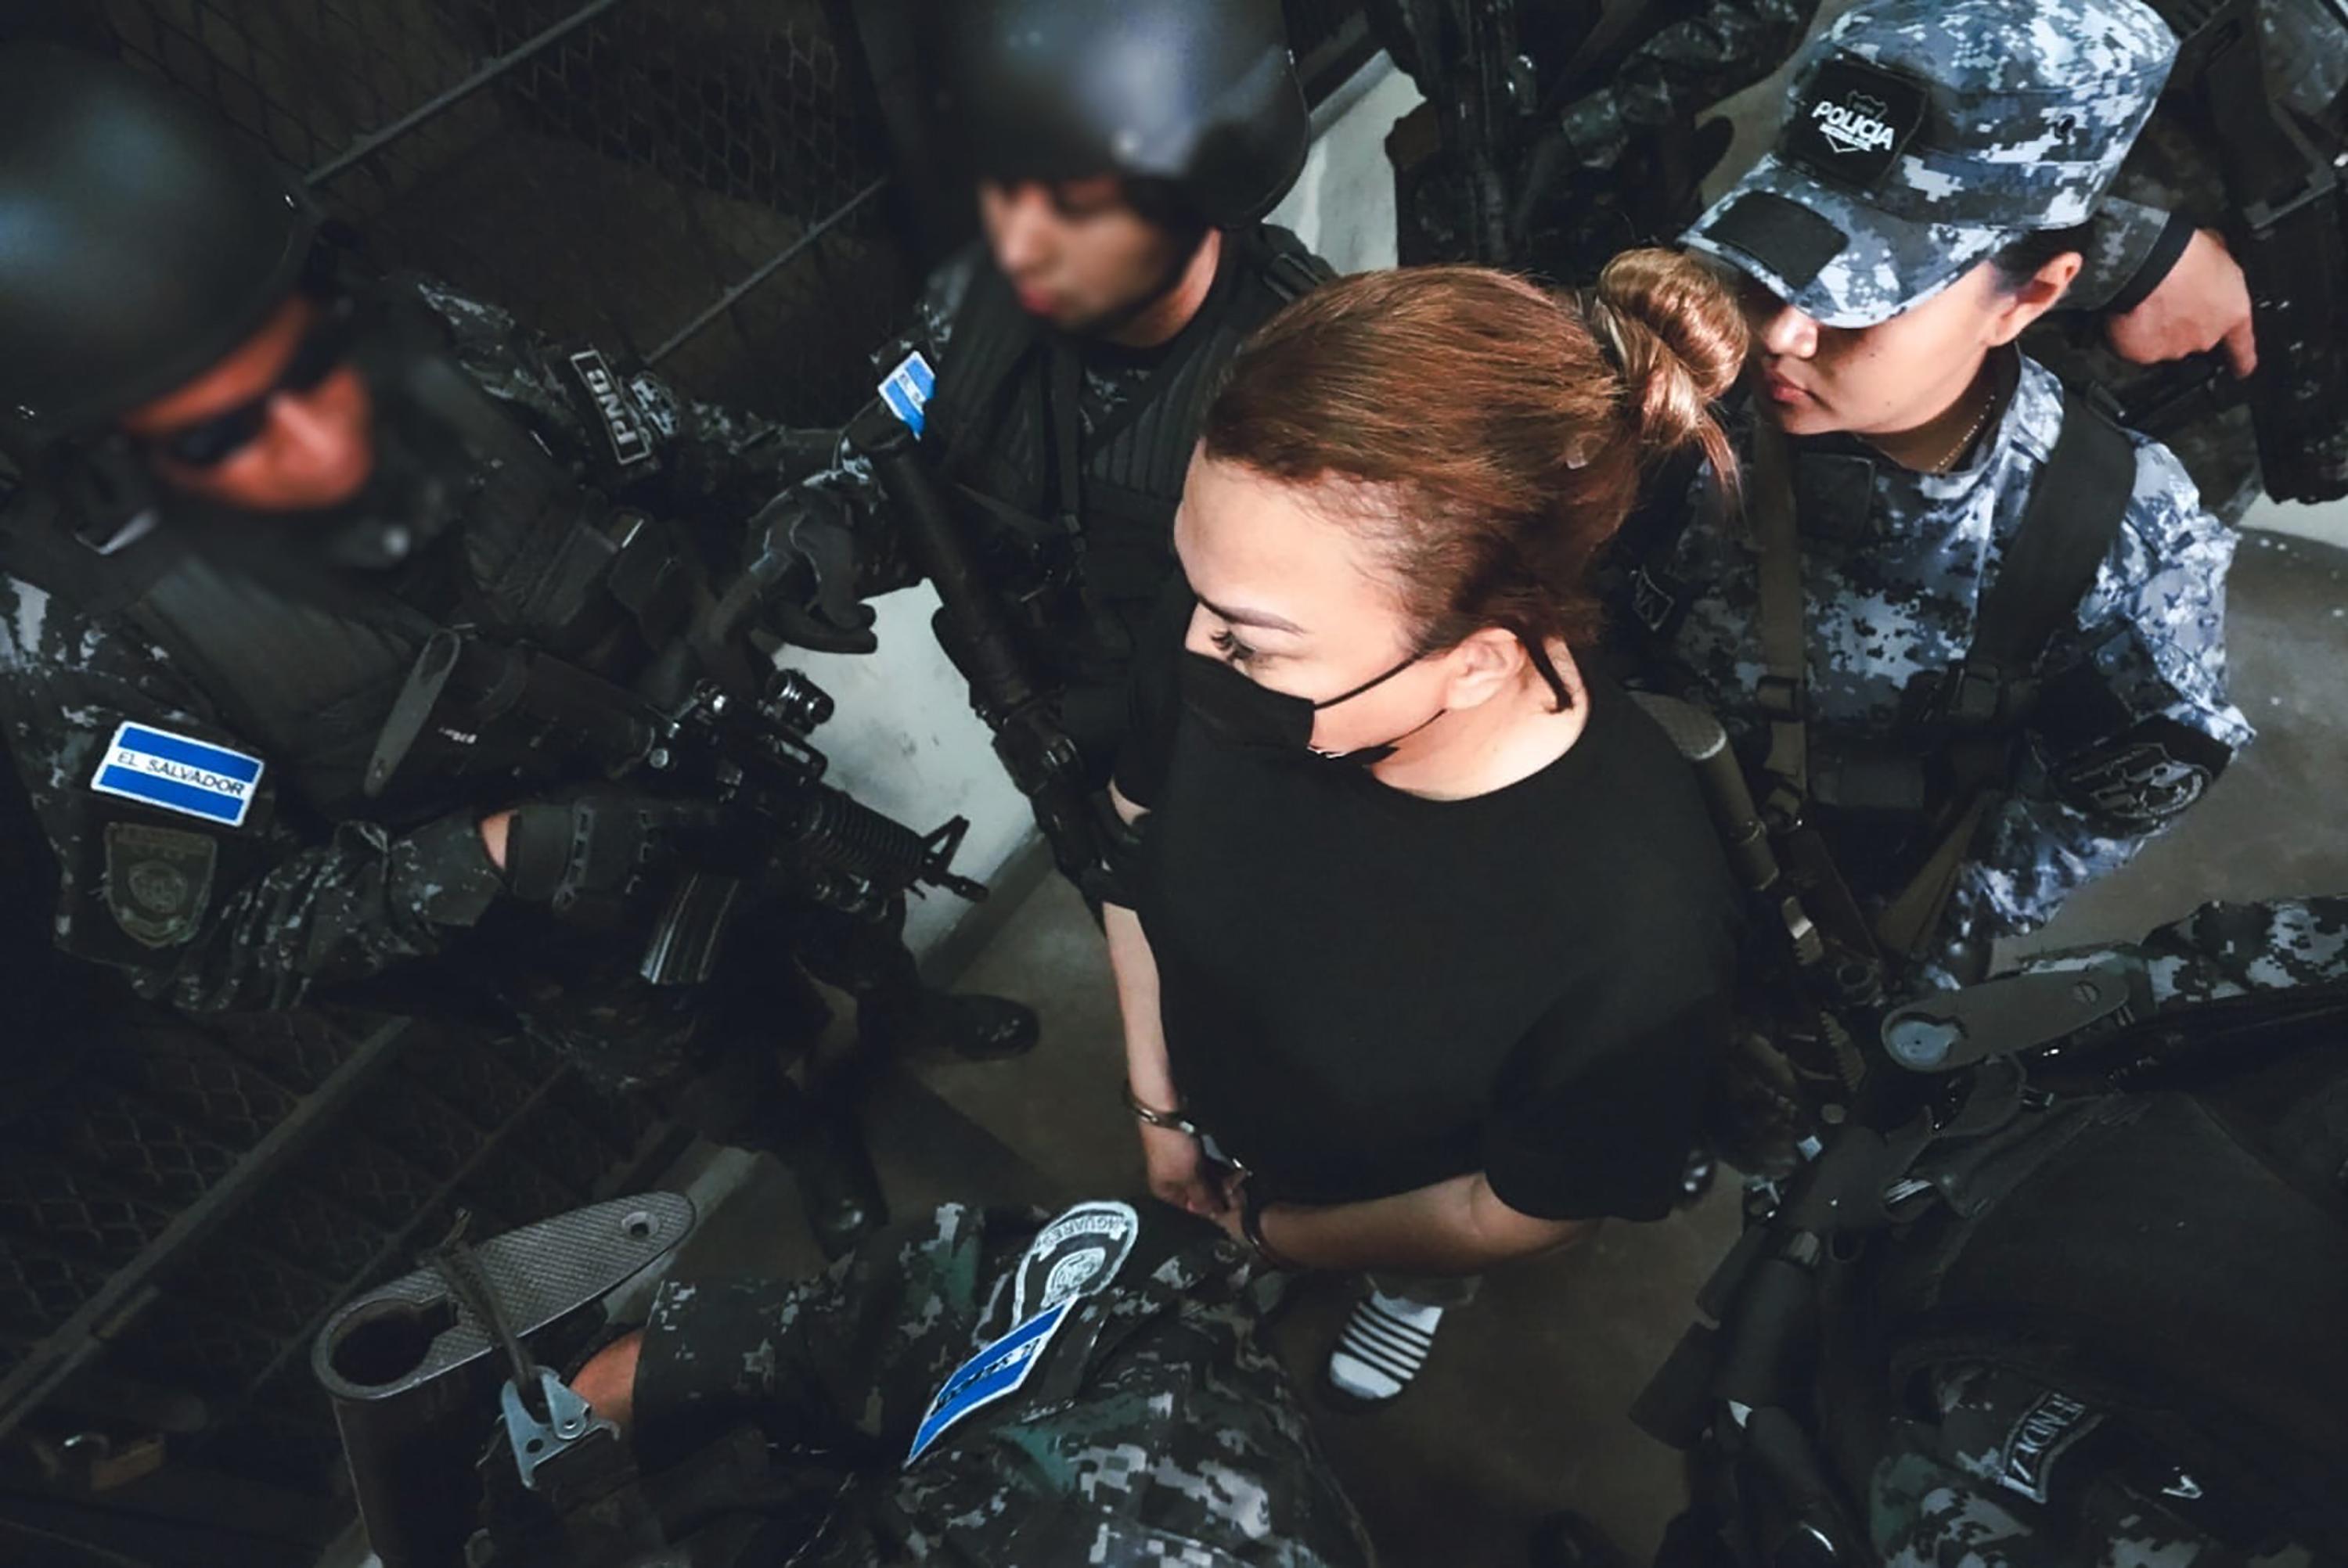 Flanked by heavily armed police officers, former Soyapango Mayor attends her first hearing on Jan. 14, 2023, for charges of embezzlement and misapproporiation of municipal funds. Photo: Attorney General